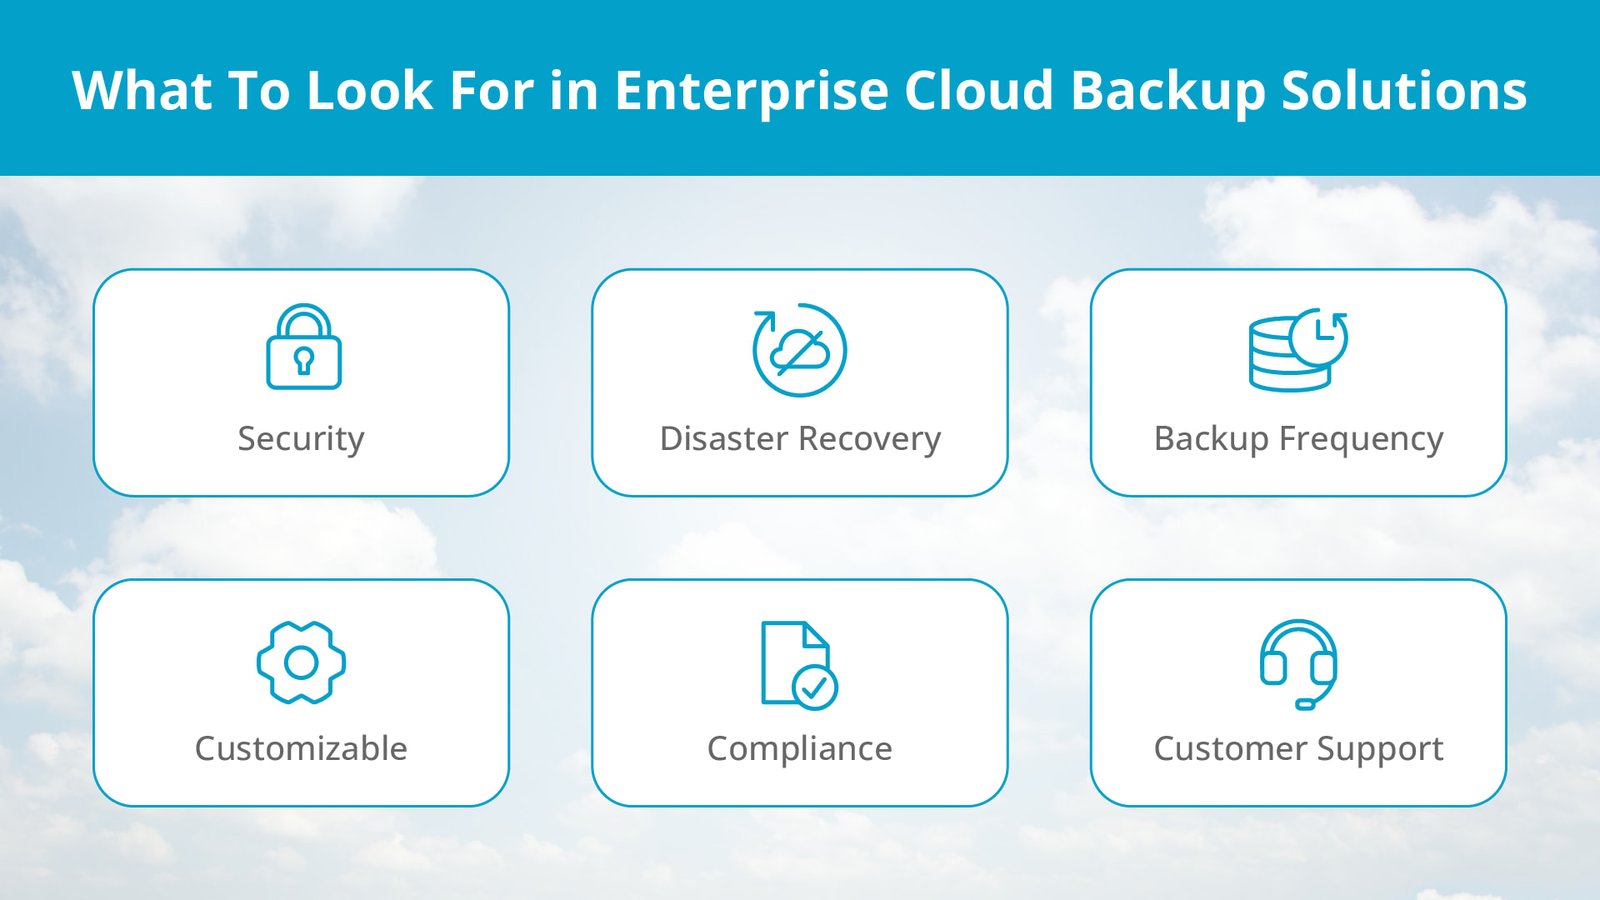 Enterprise cloud backups allow you to restore backed-up data with ease.